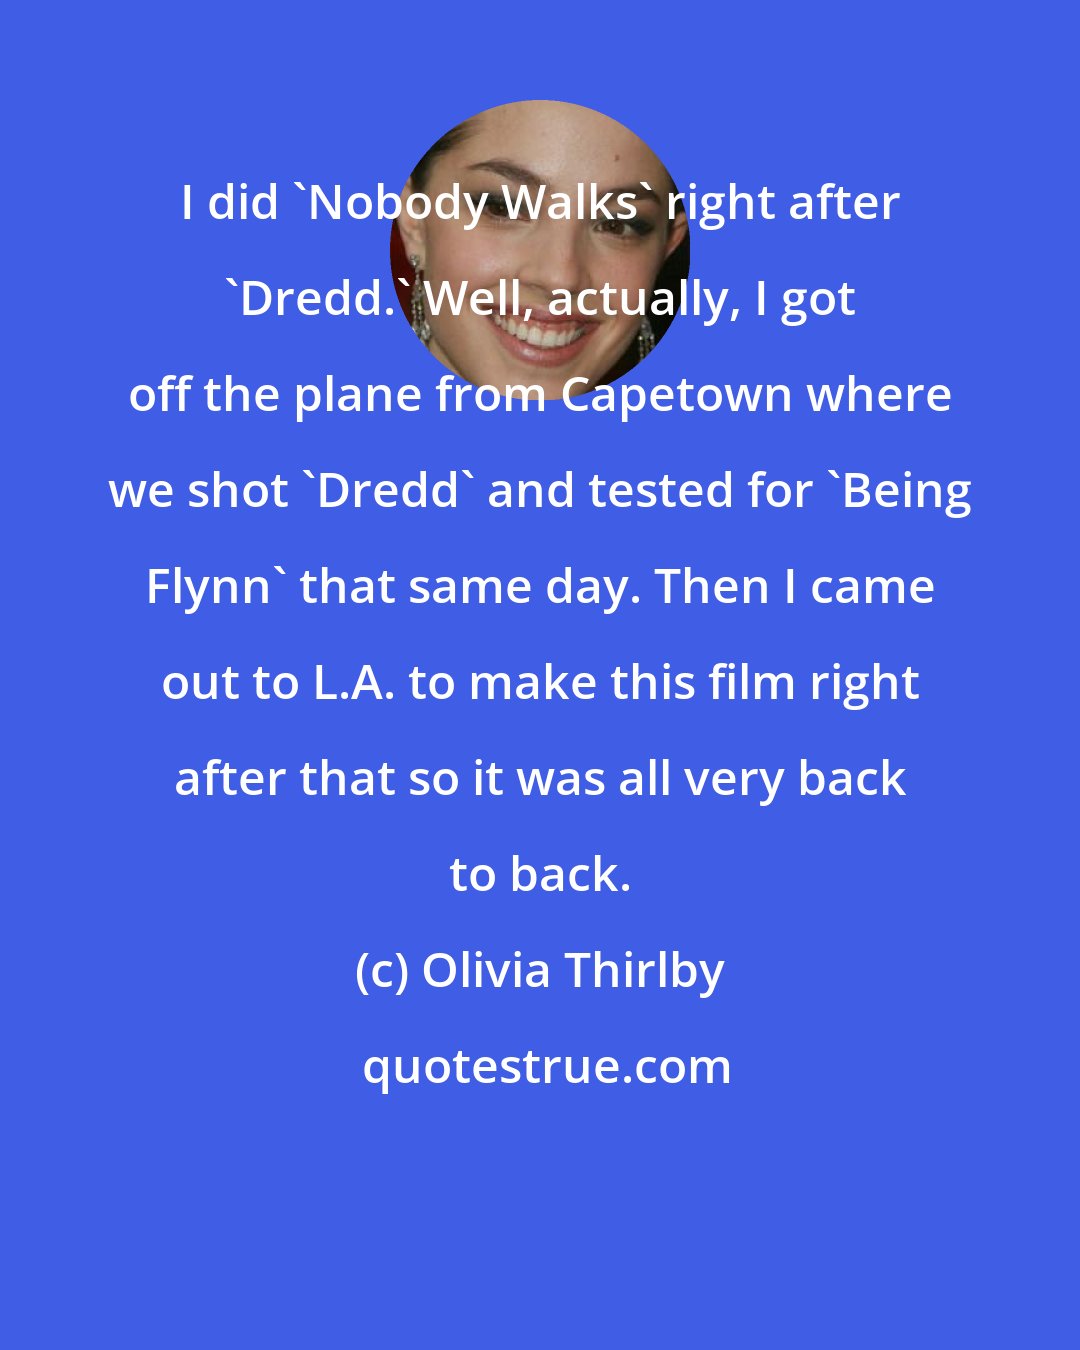 Olivia Thirlby: I did 'Nobody Walks' right after 'Dredd.' Well, actually, I got off the plane from Capetown where we shot 'Dredd' and tested for 'Being Flynn' that same day. Then I came out to L.A. to make this film right after that so it was all very back to back.